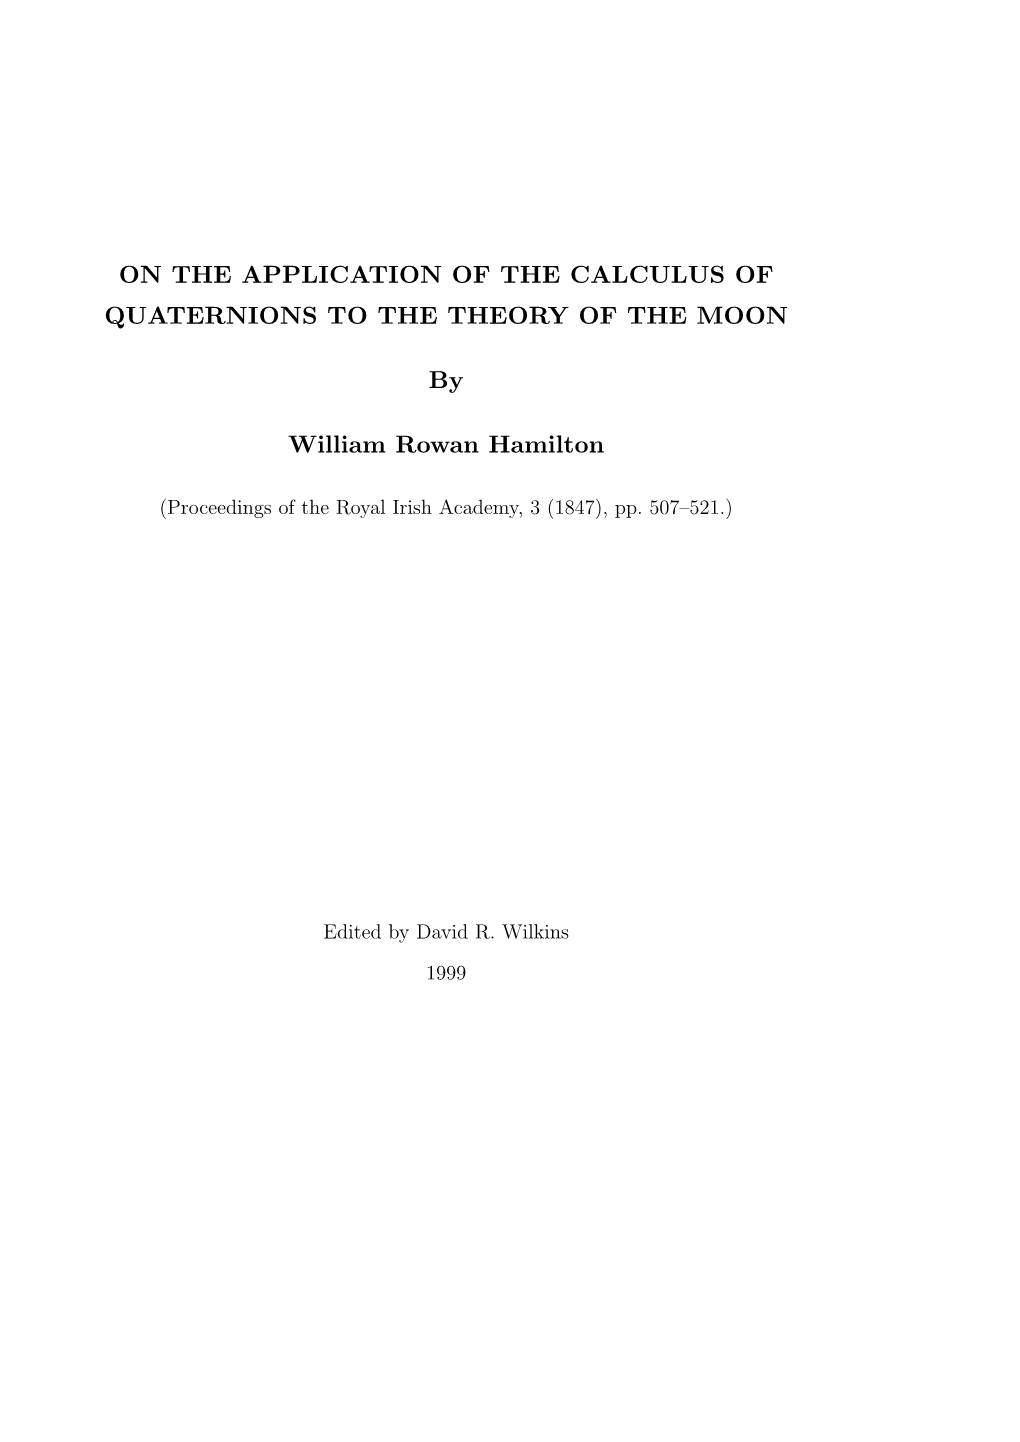 On the Application of the Calculus of Quaternions to the Theory of the Moon